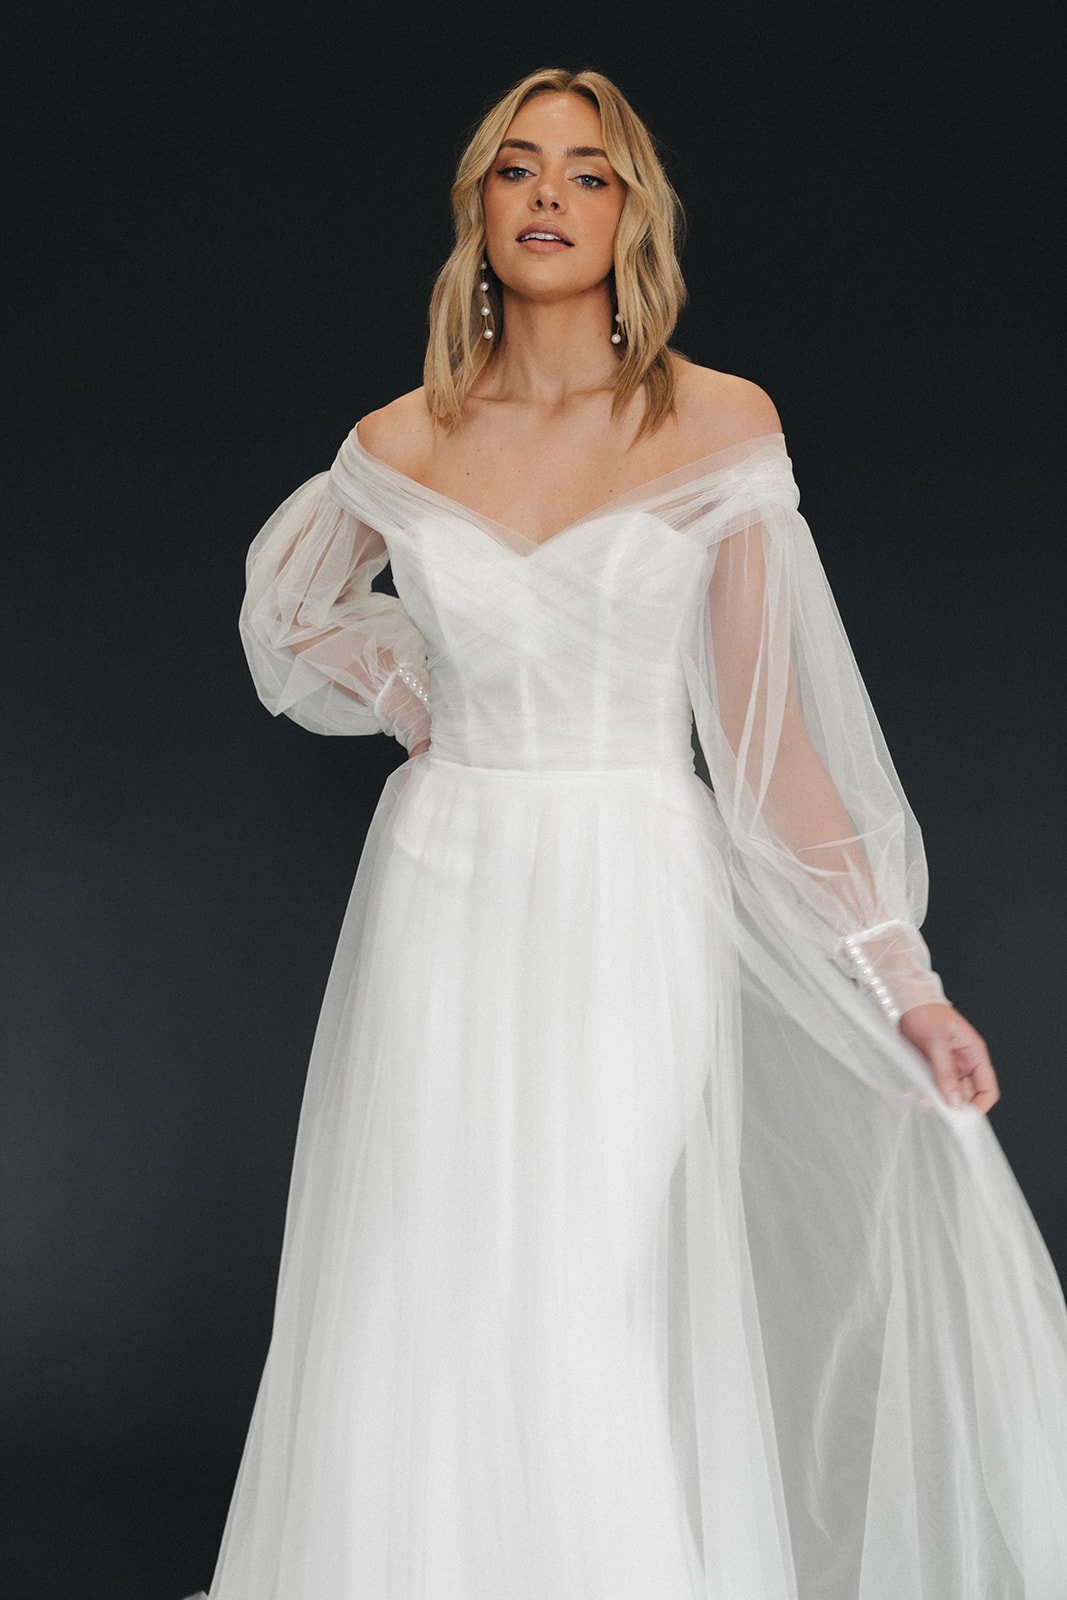 Moira Hughes Couture Wedding Gown Lourdes Tulle Off-shoulder Sleeve.jpg